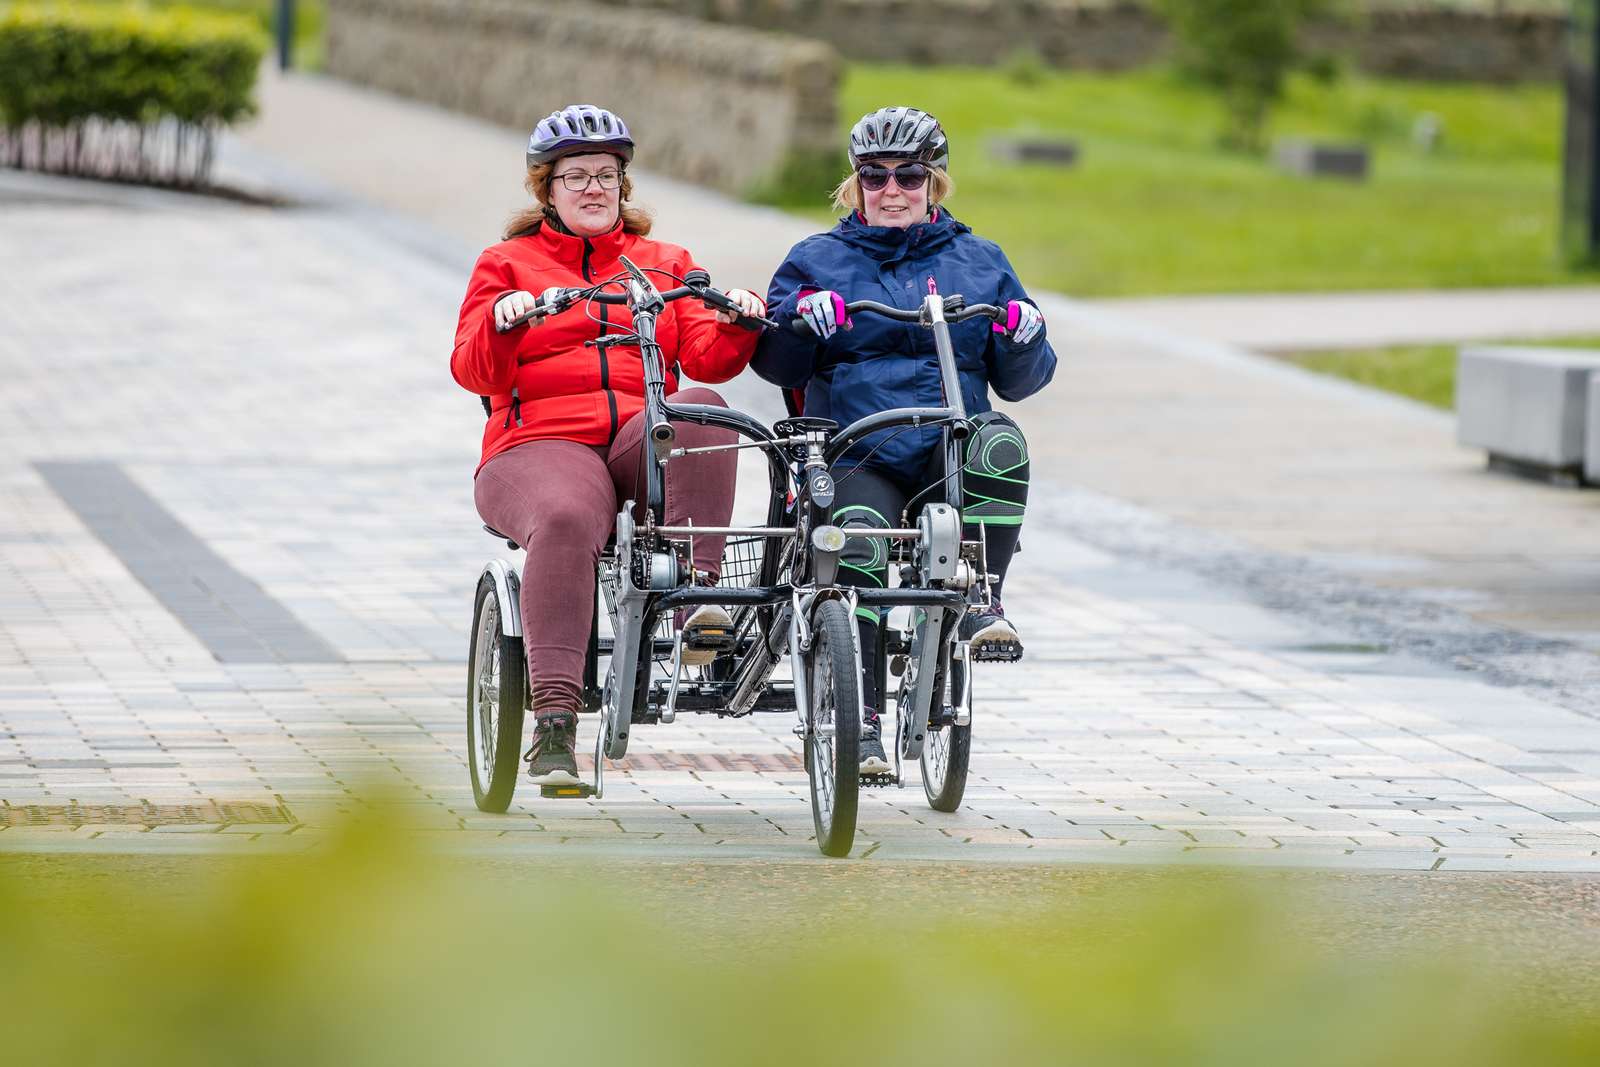 Cycling UK/WheelNess, all ability cycling sessions attended by adventurer and paralympian Karen Darke.